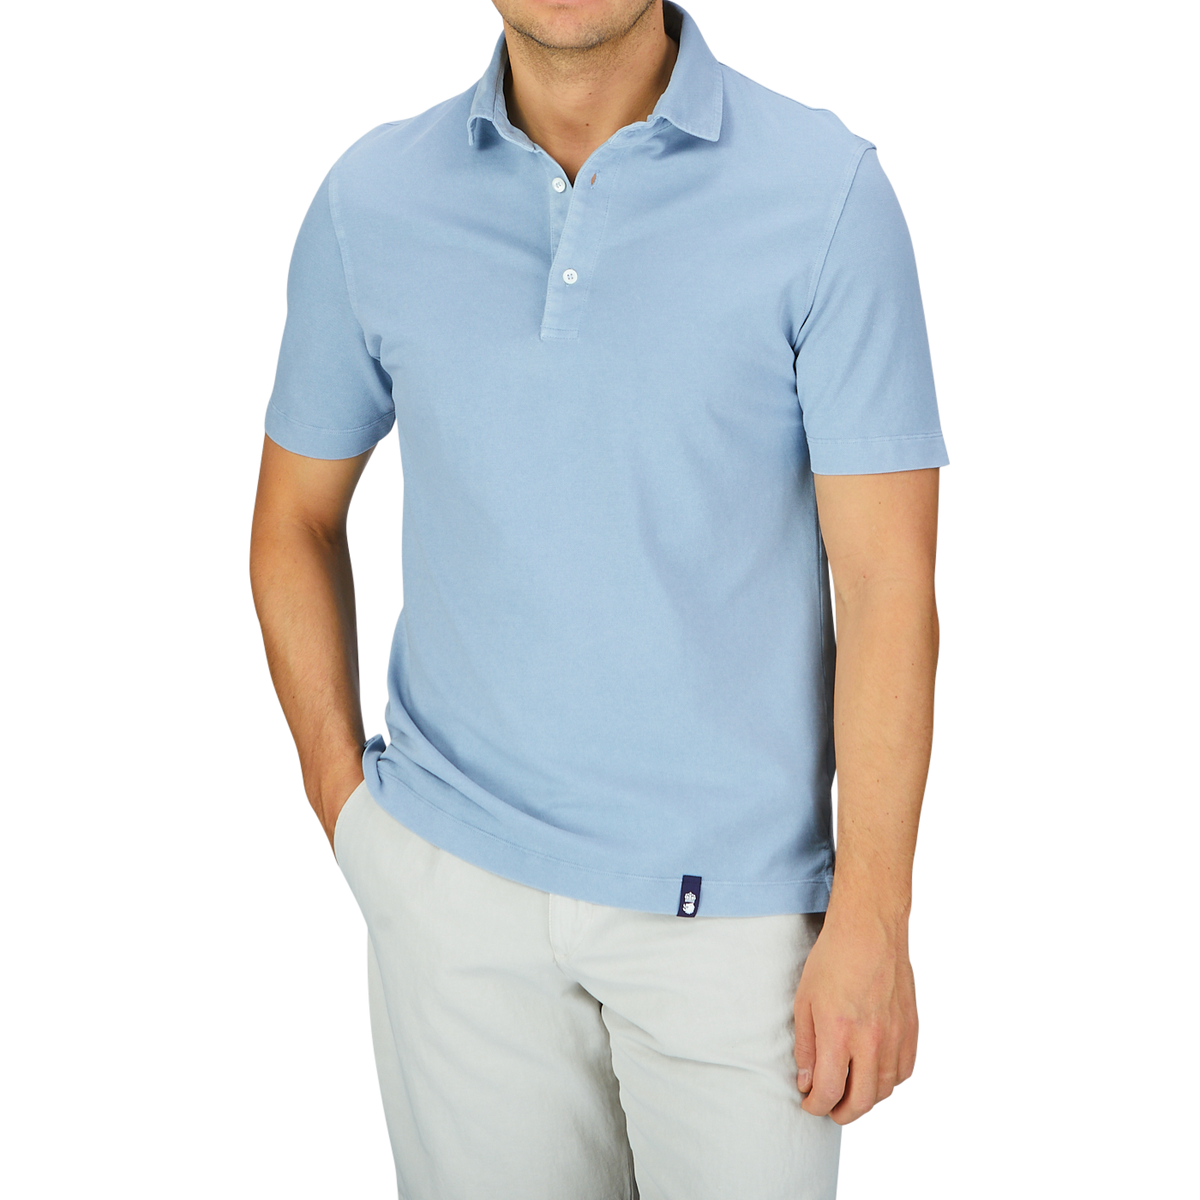 A man wearing a light blue Drumohr Sky Blue Cotton Piquet Polo Shirt and white pants against a grey background.